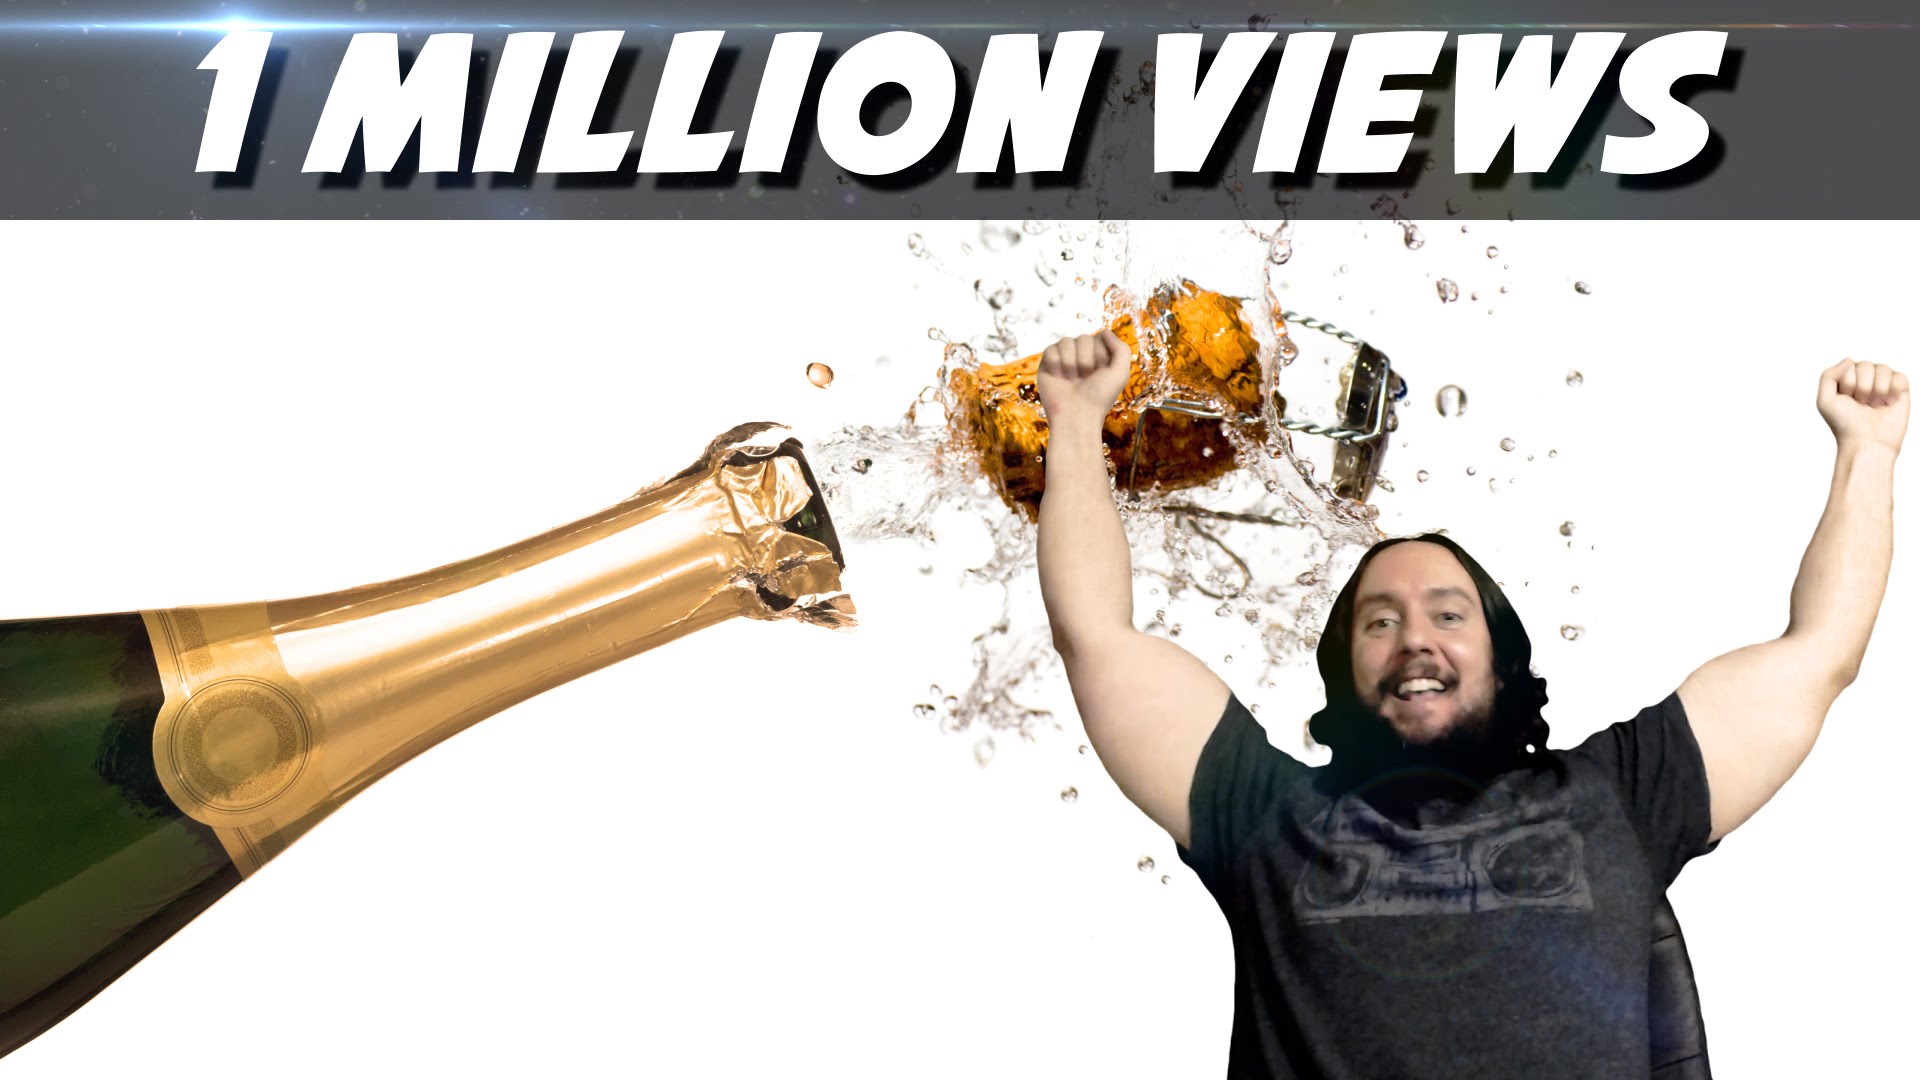 [Psynaps Vlog] Celebrating 1,000,000 views, Cheers with Viewers! Thank you!